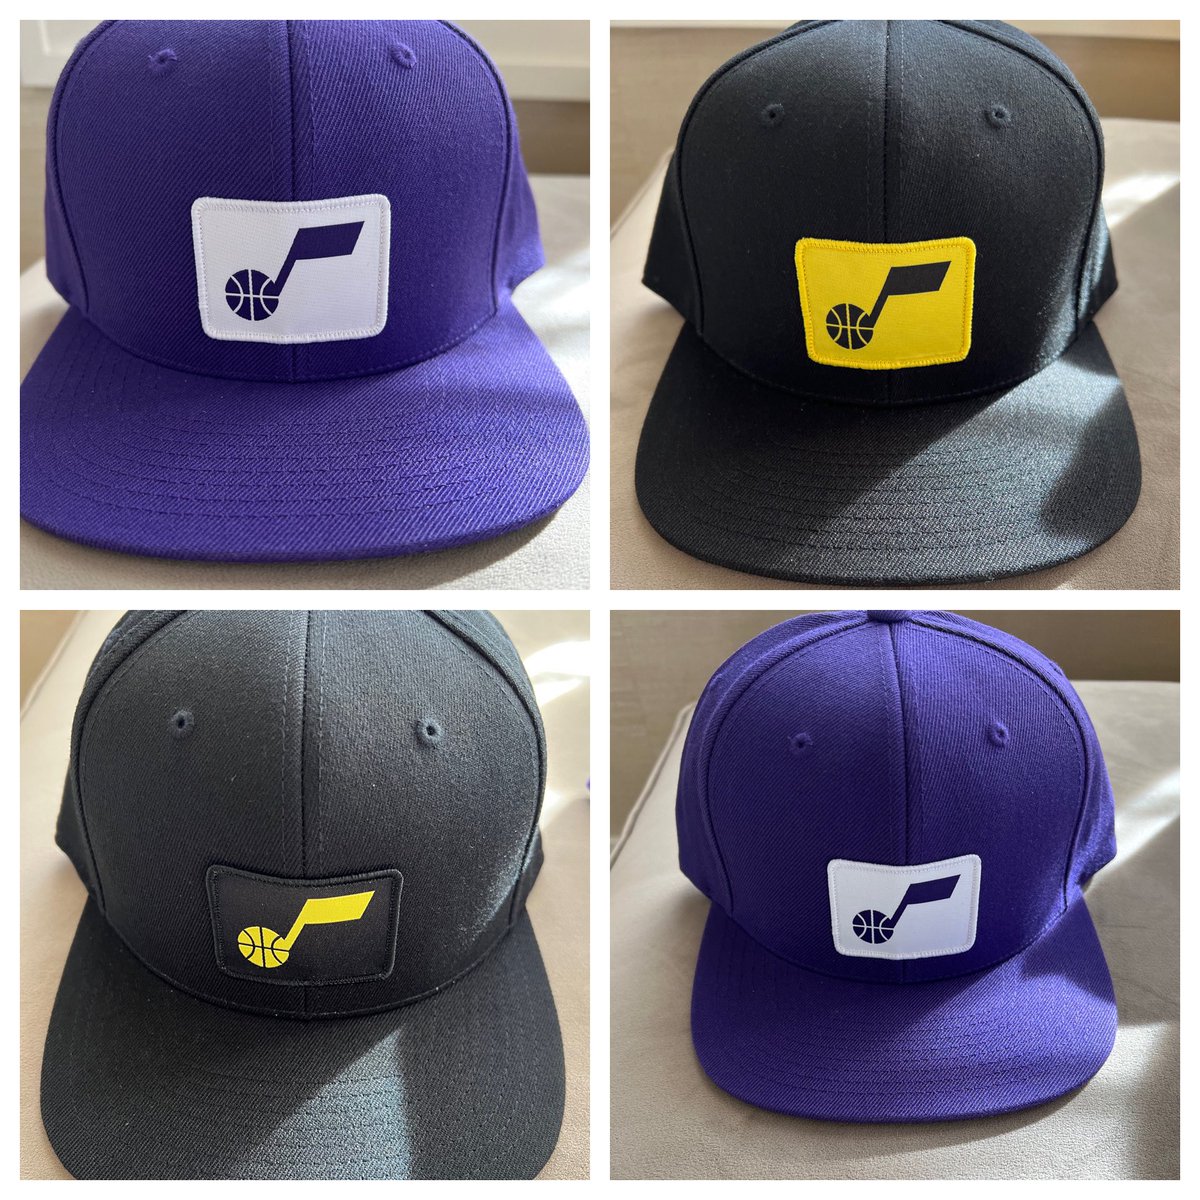 Love the patch on these new hats. Reply if you want one. Will pick 100 people from the replys #TakeNote